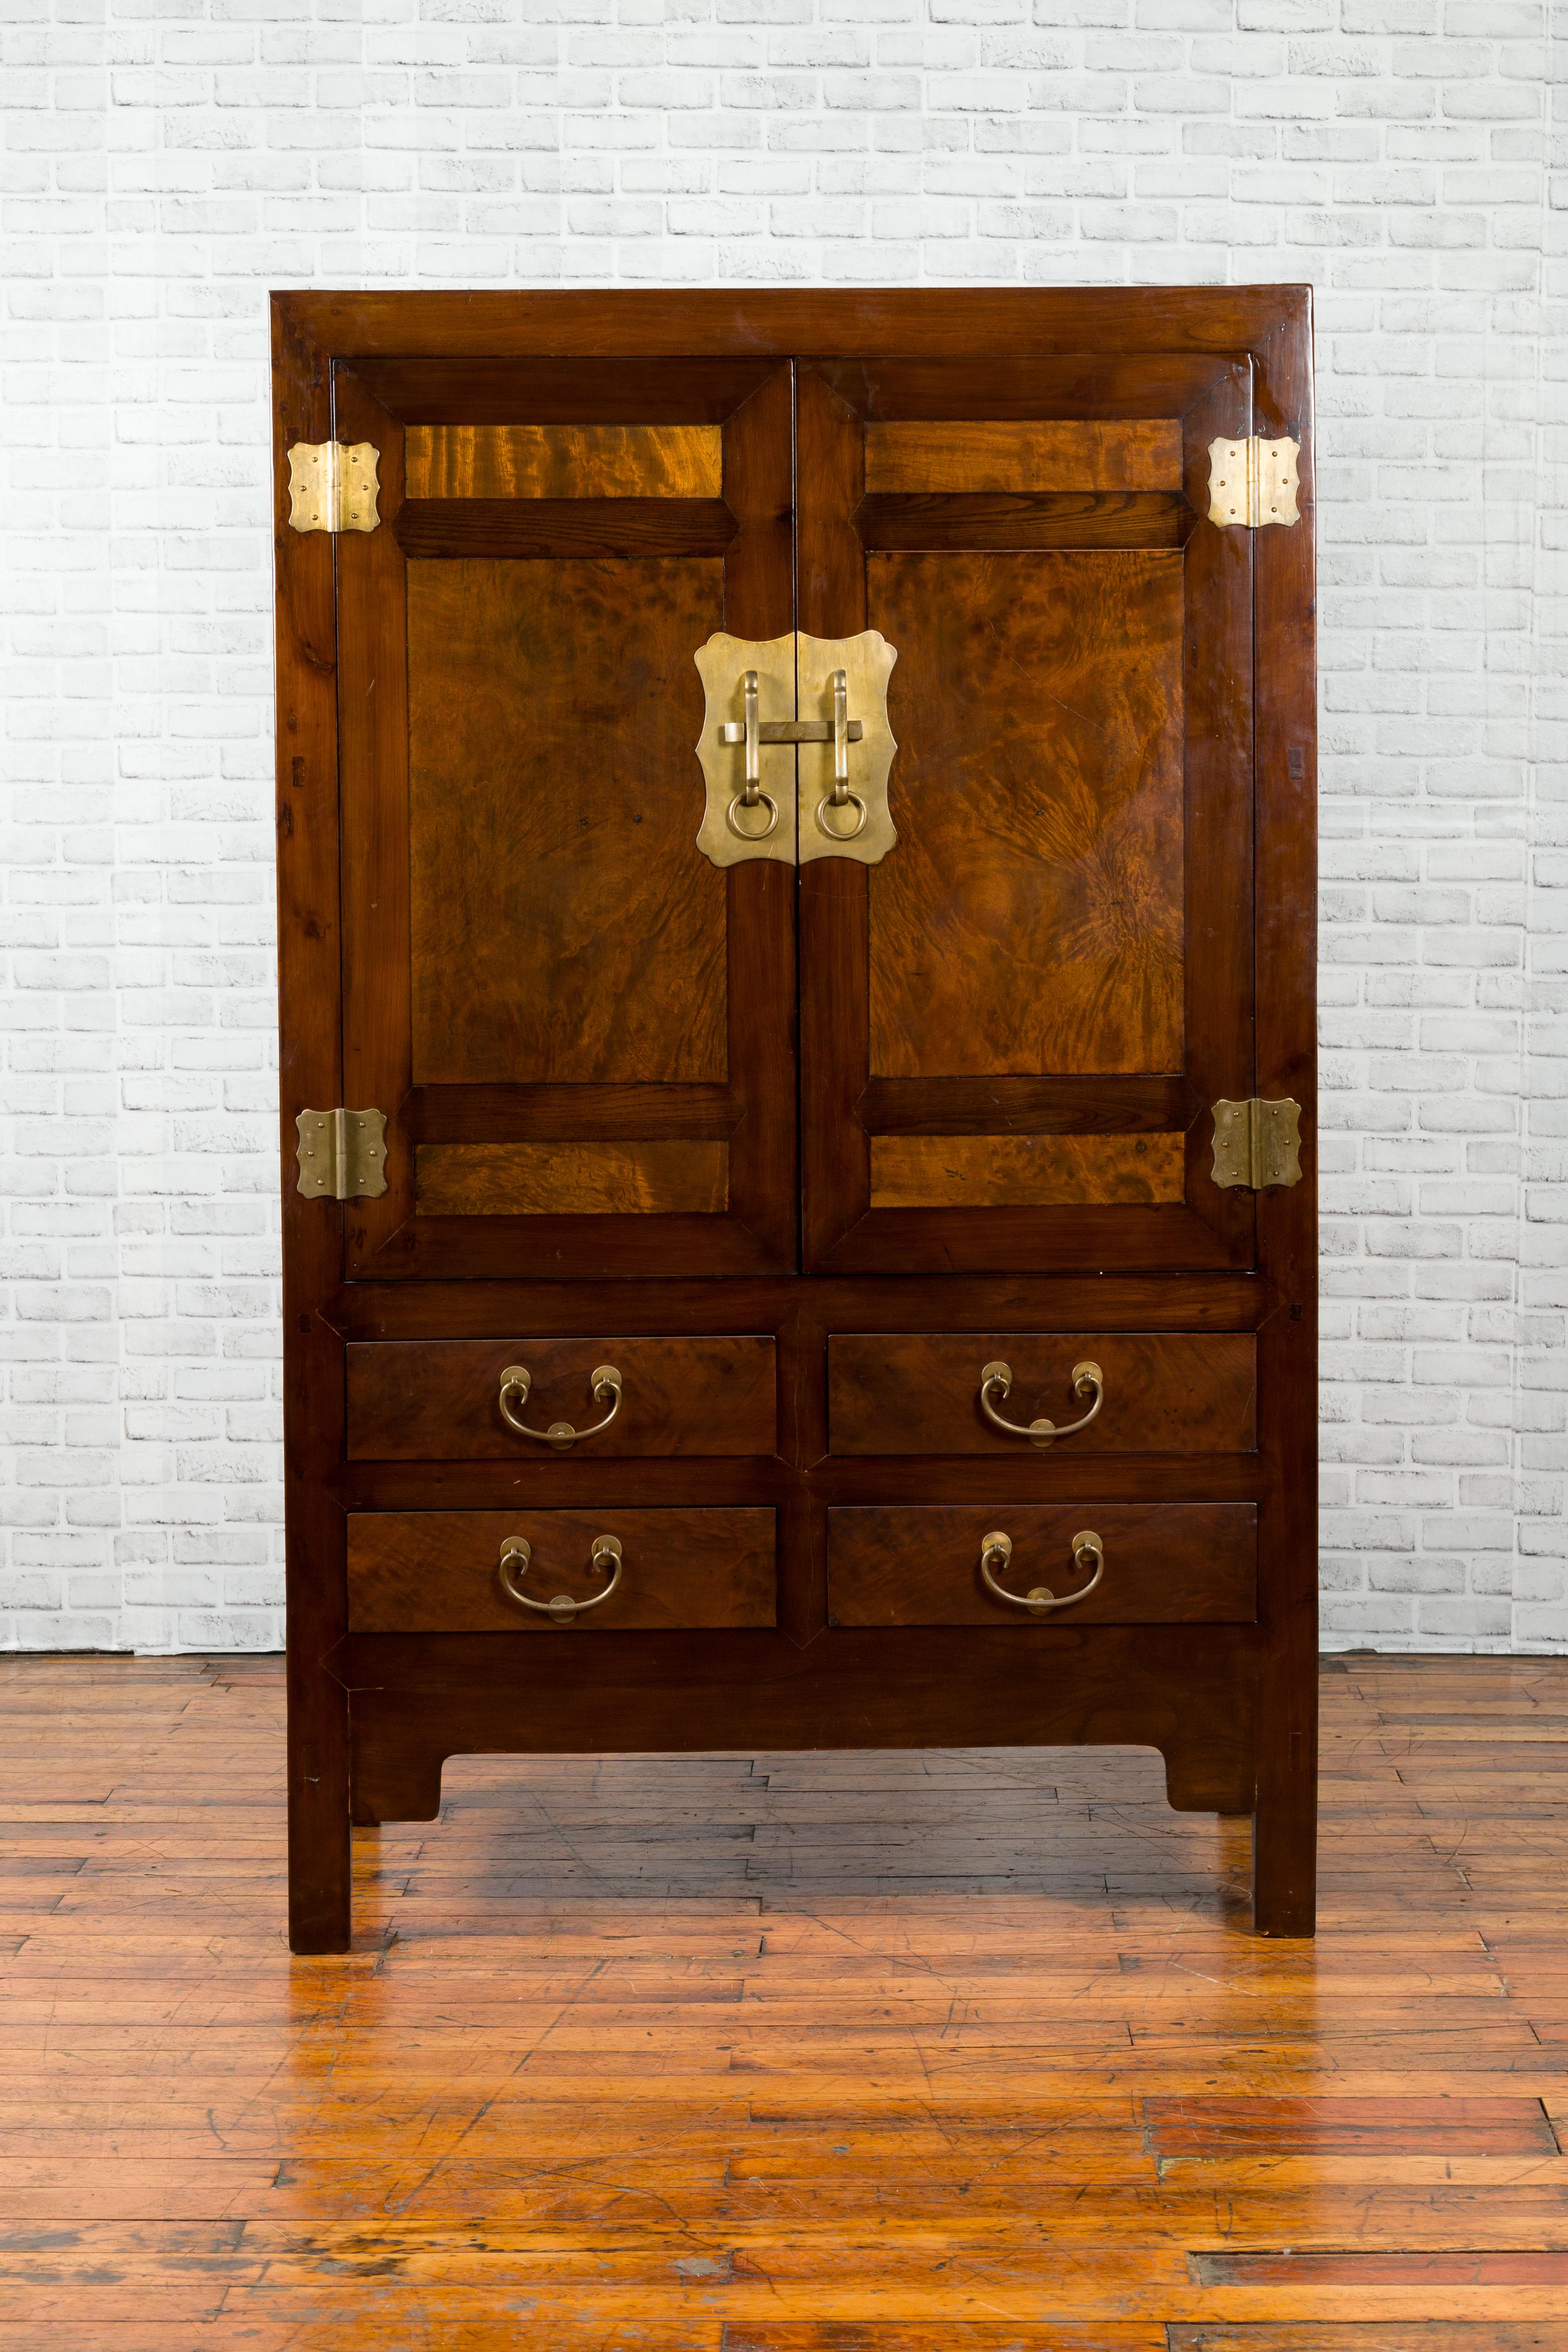 Chinese 1920s-1930s Elm and Burl Cabinet with Doors, Drawers and Brass Hardware For Sale 5